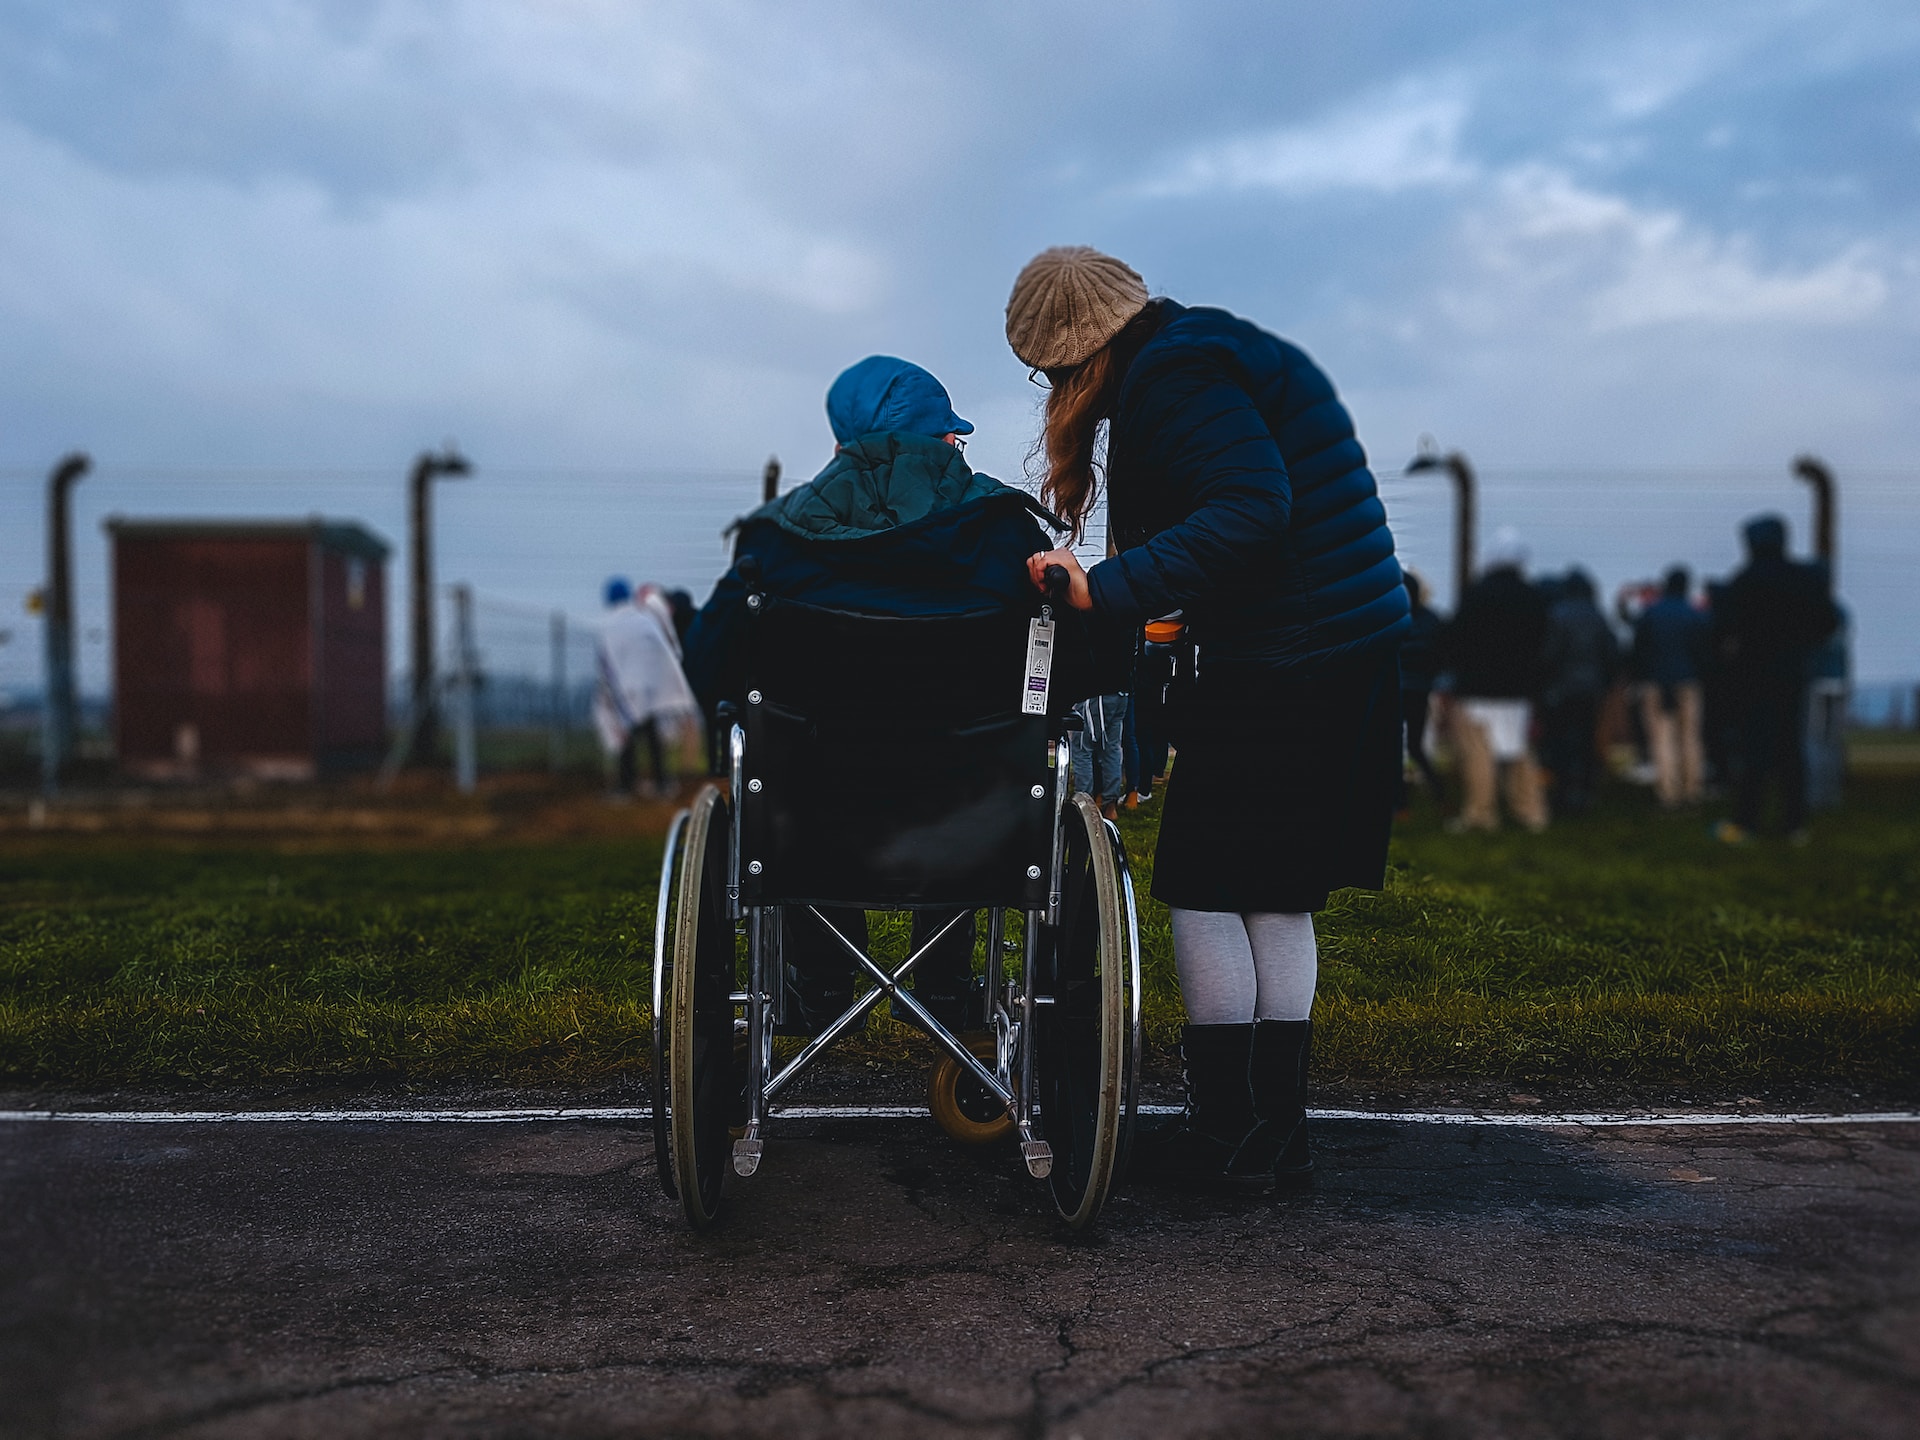 A woman standing next to a person in a wheelchair